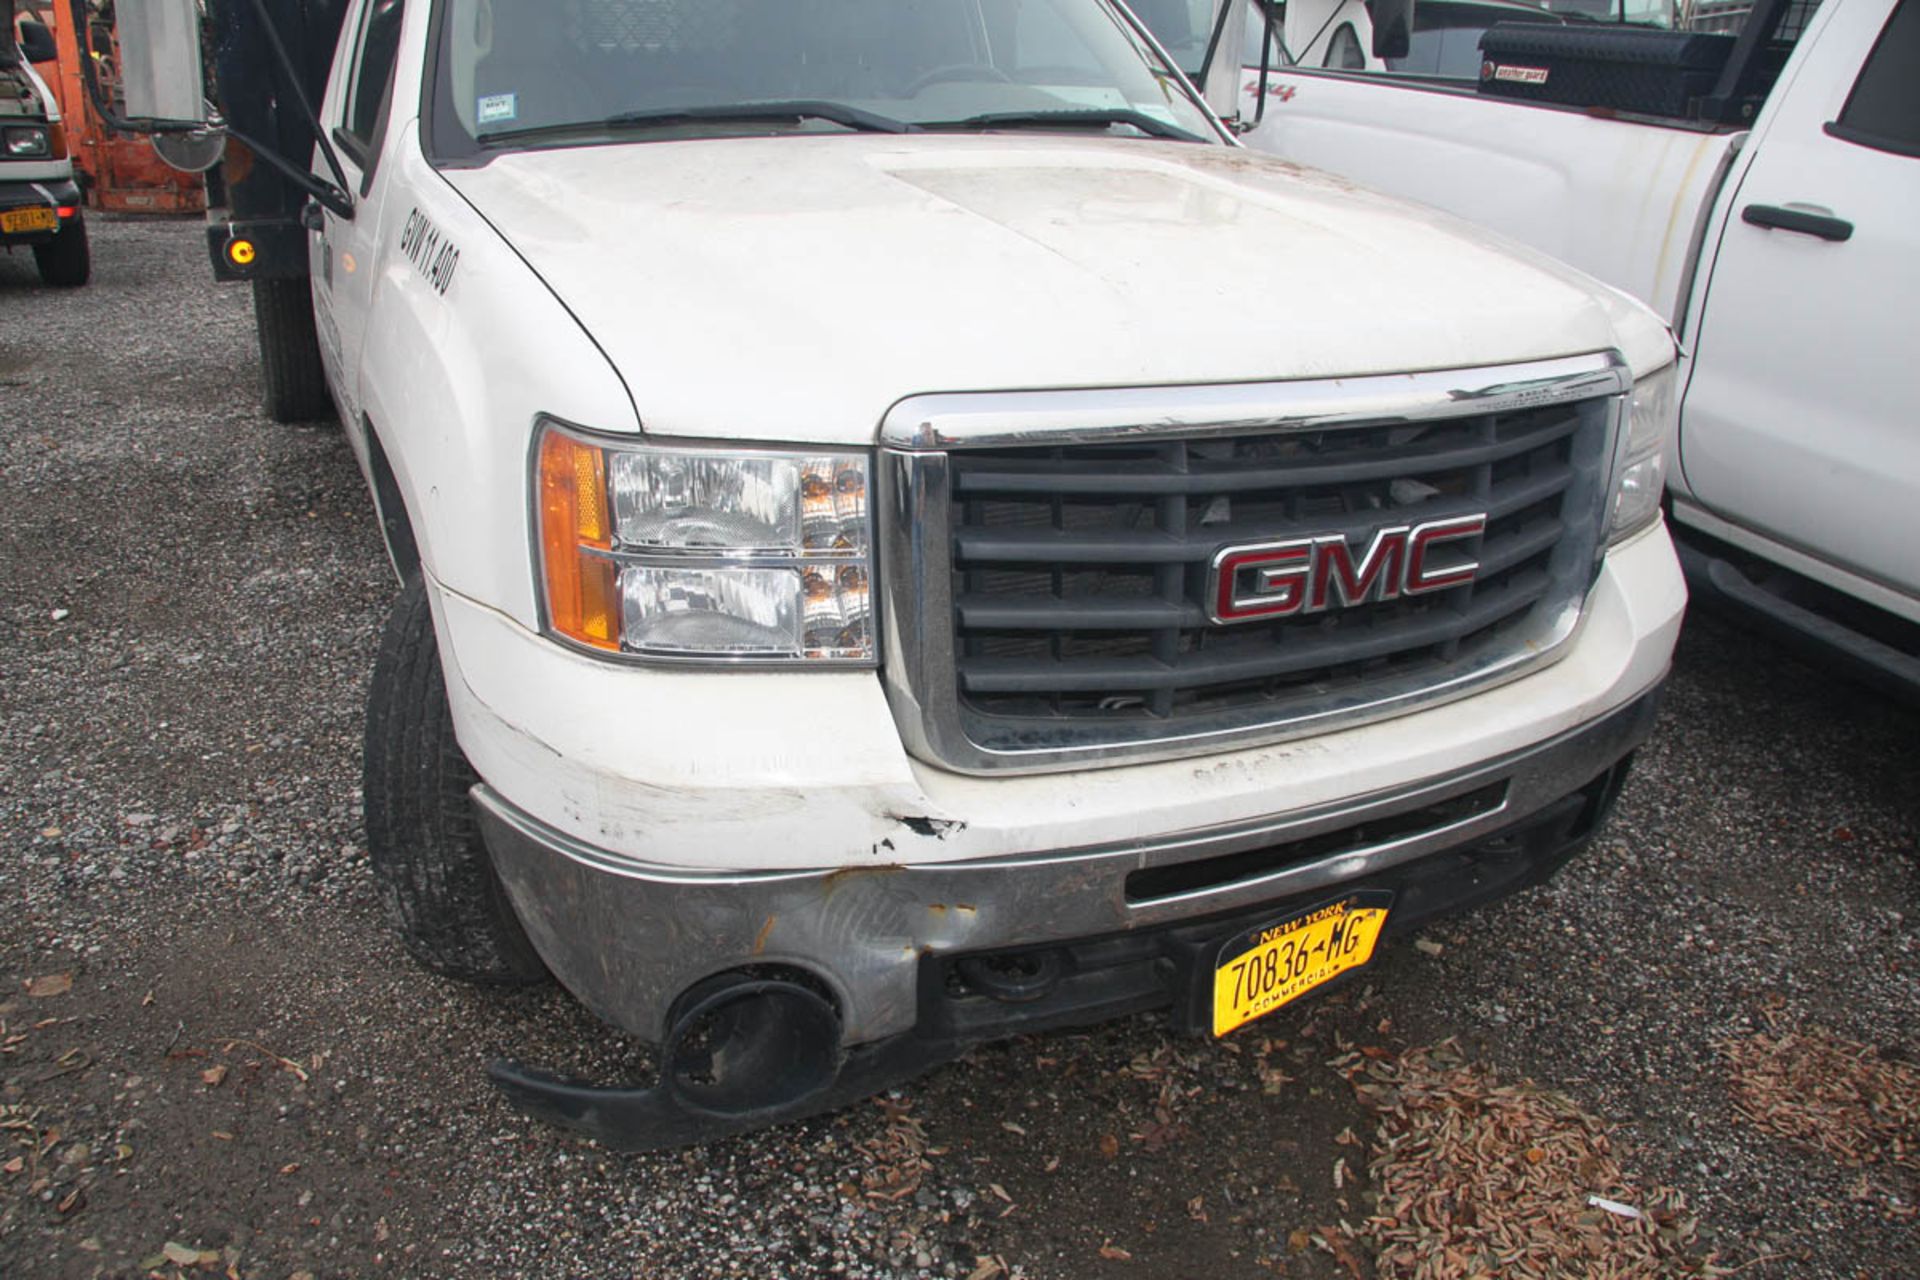 2007 GMC 3500HD 12' STAKE BODY TRUCK, AUTOMATIC, APPROXIMATELY 20,011 MILES, VIN: GDJC34K17E585253 - Image 3 of 19